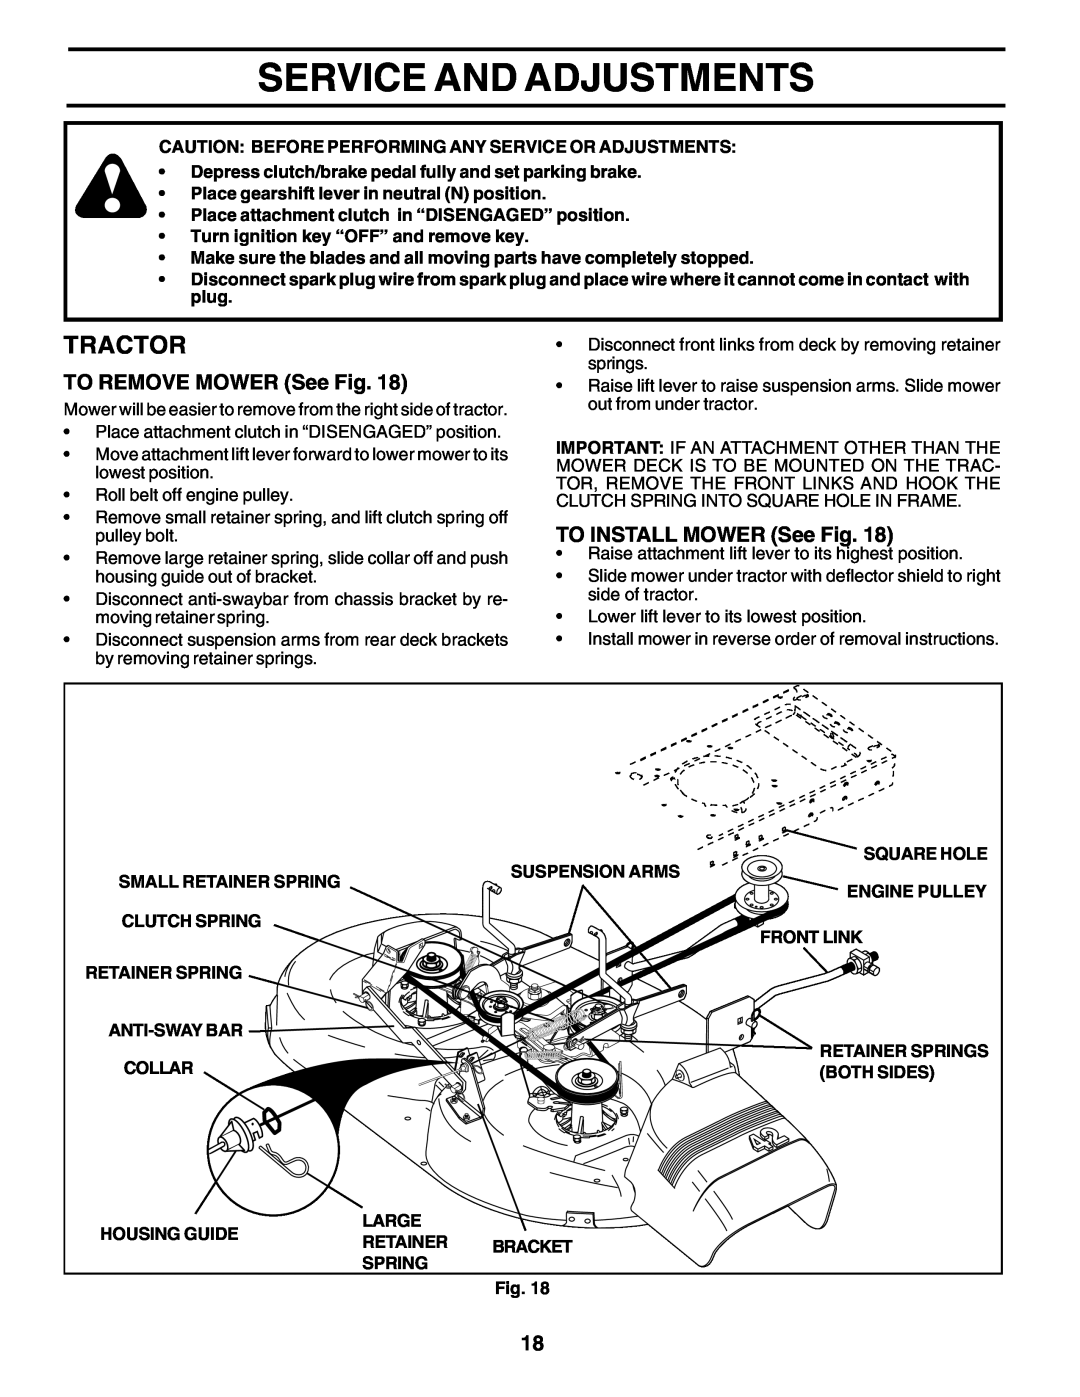 Poulan 180198 owner manual Service And Adjustments, TO REMOVE MOWER See Fig, TO INSTALL MOWER See Fig, Tractor 